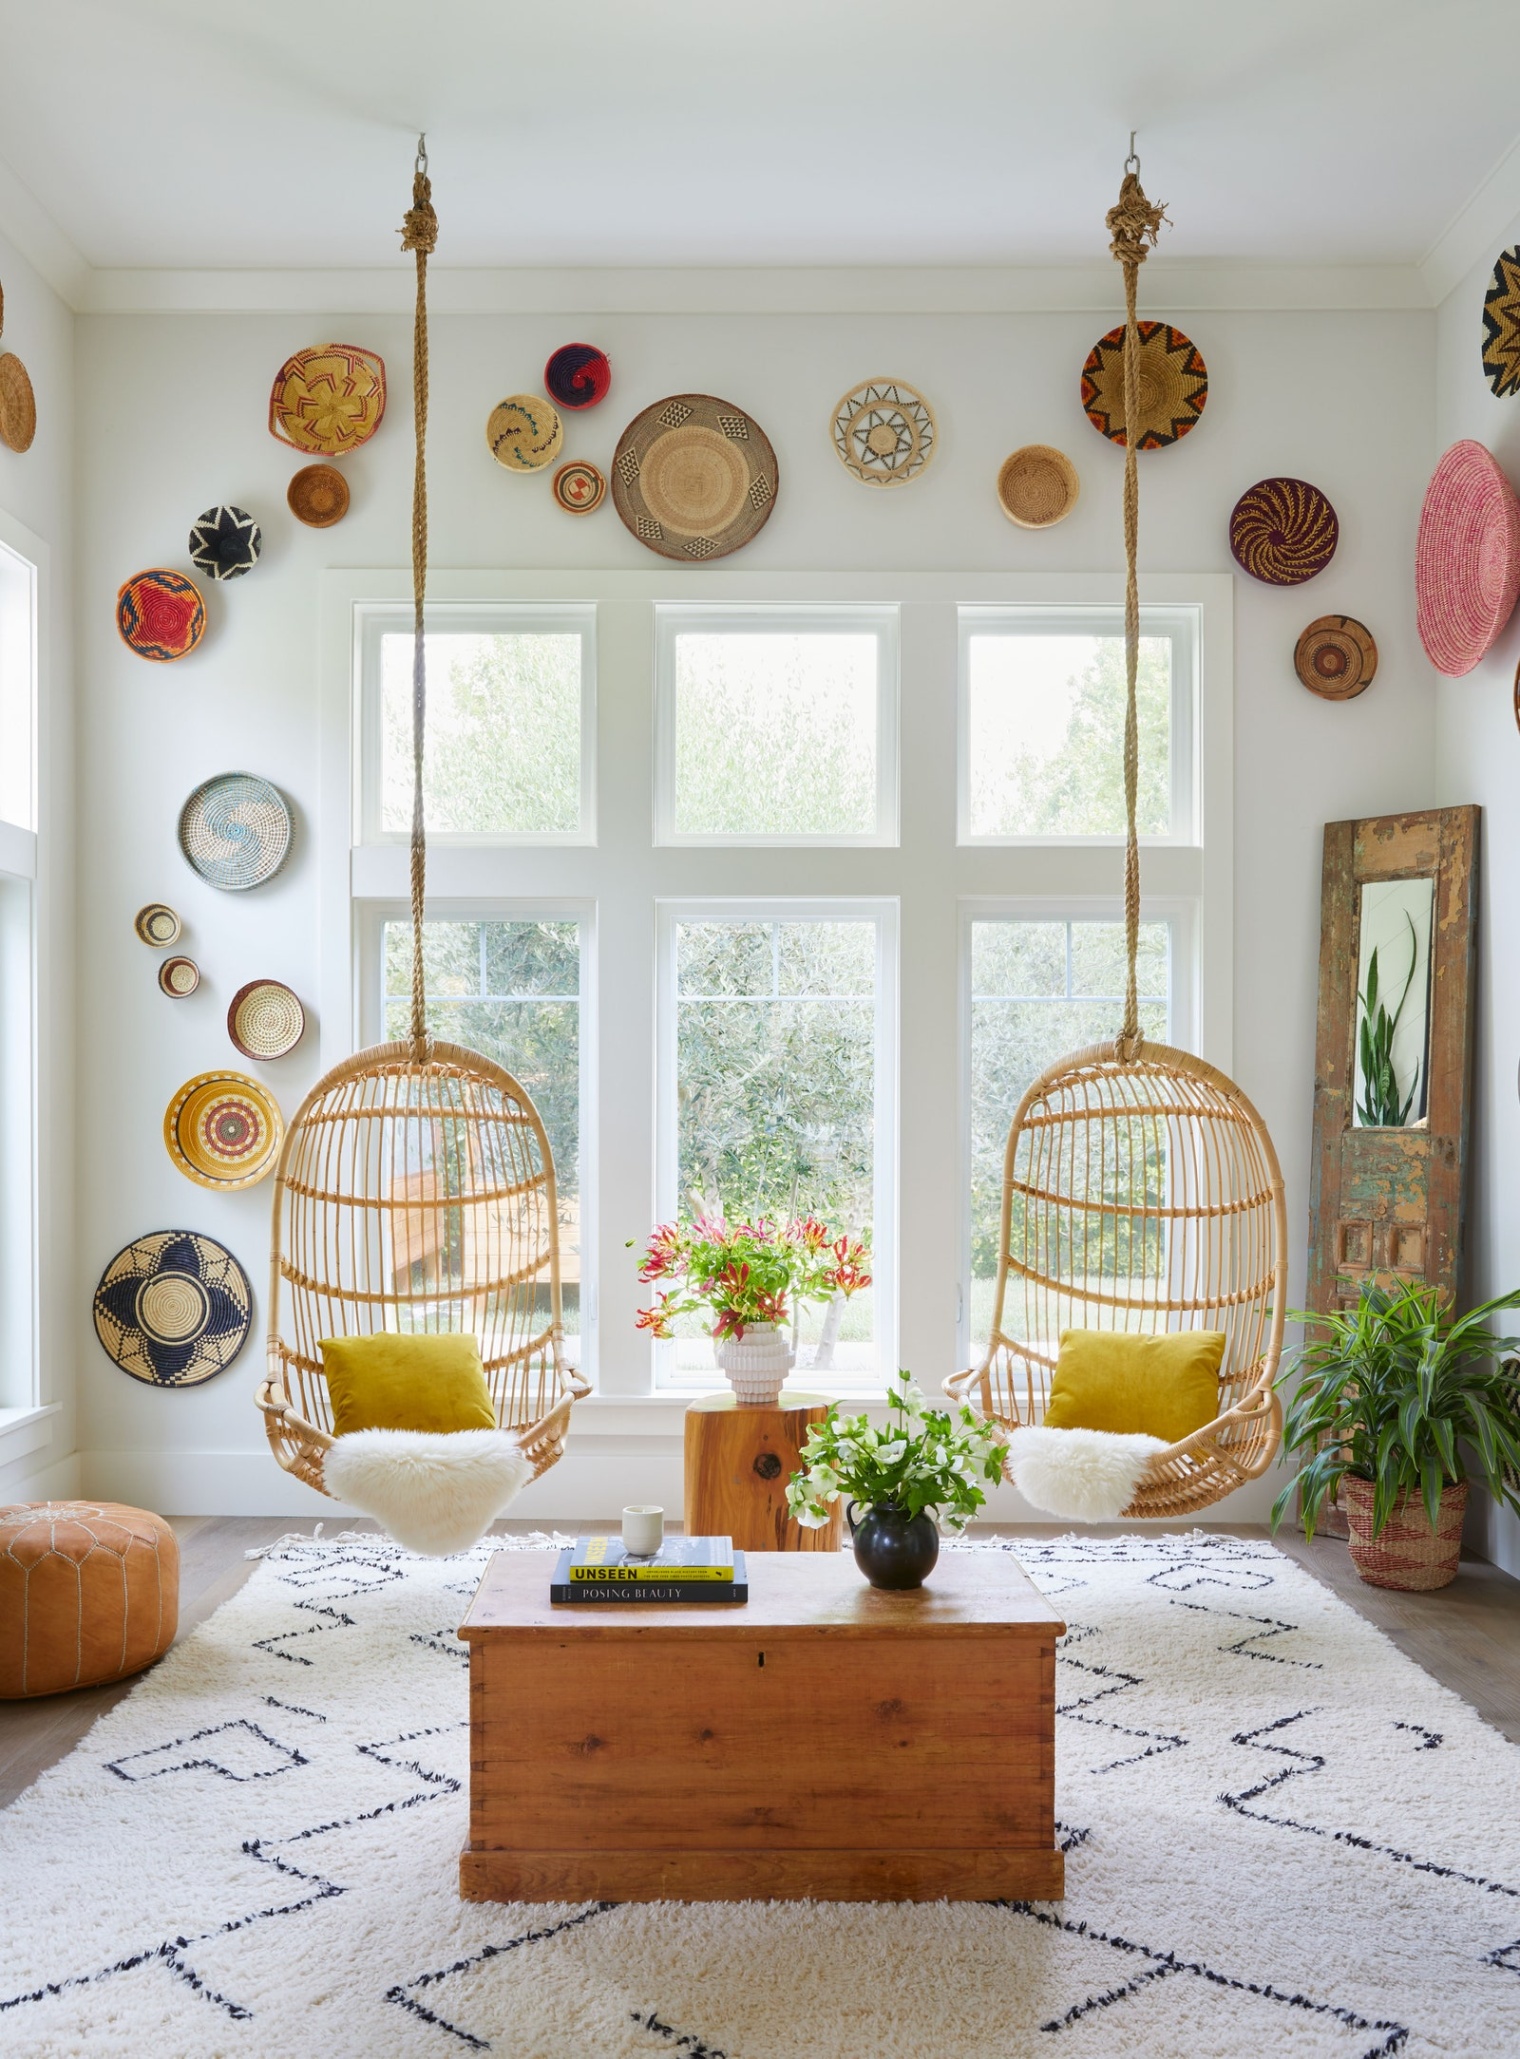 Get Creative: Big Wall Decor Ideas To Transform Your Space